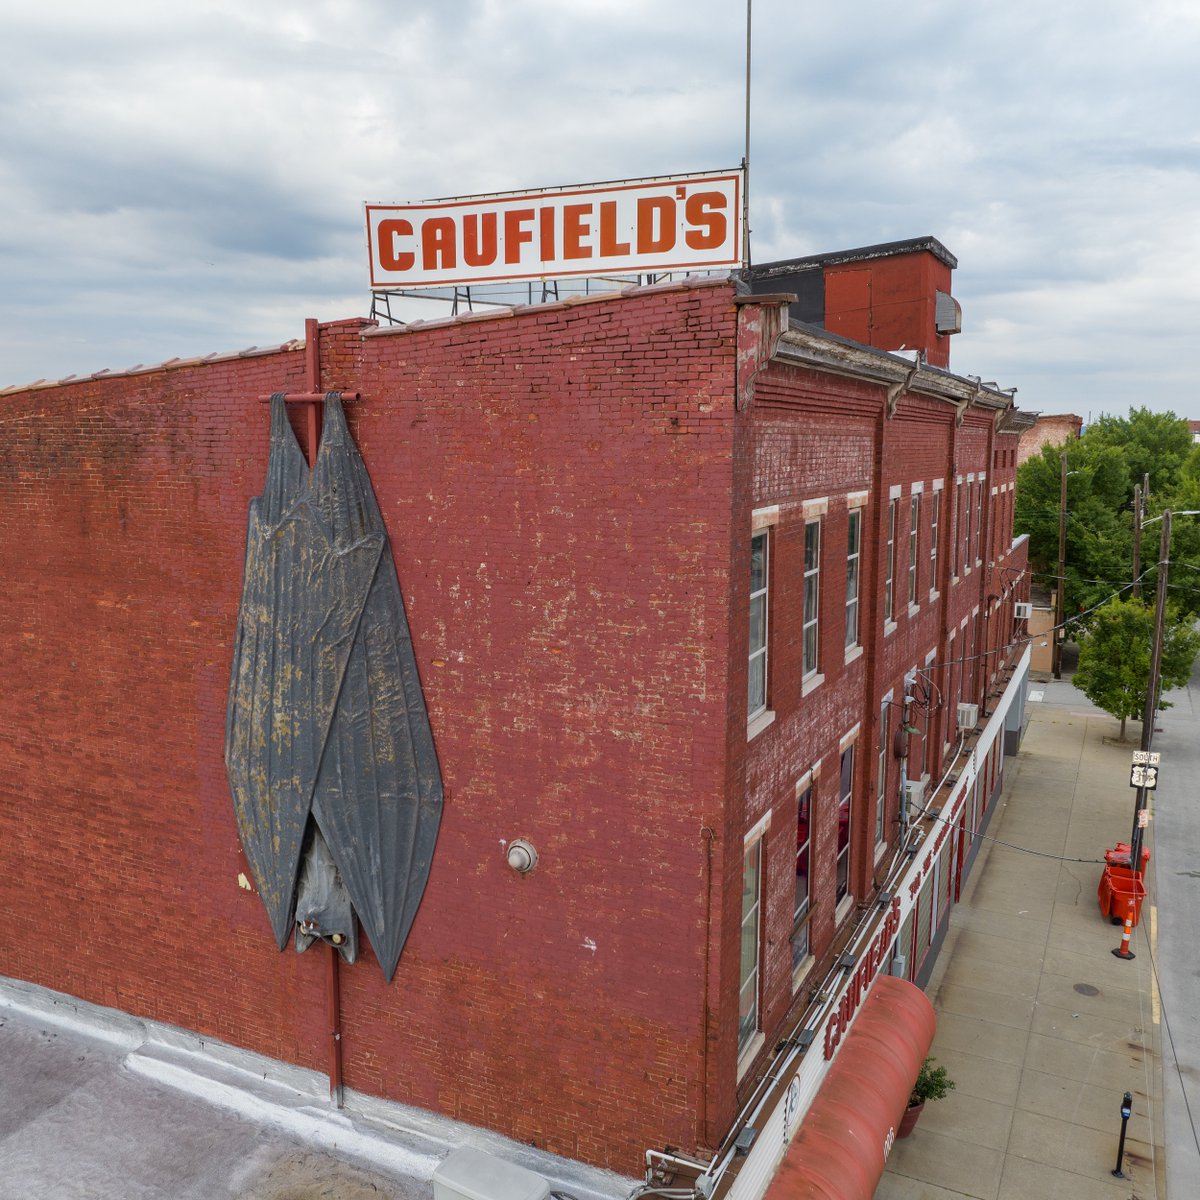 Did you know Louisville's Main Street is home to the world's largest vampire bat? 🦇 The batty behemoth is posted outside Caufield's, a century-old novelty and Halloween hot spot. 👻 Read more about what makes Louisville's Main Street larger than life: gotolouisville.com/blog/louisvill…